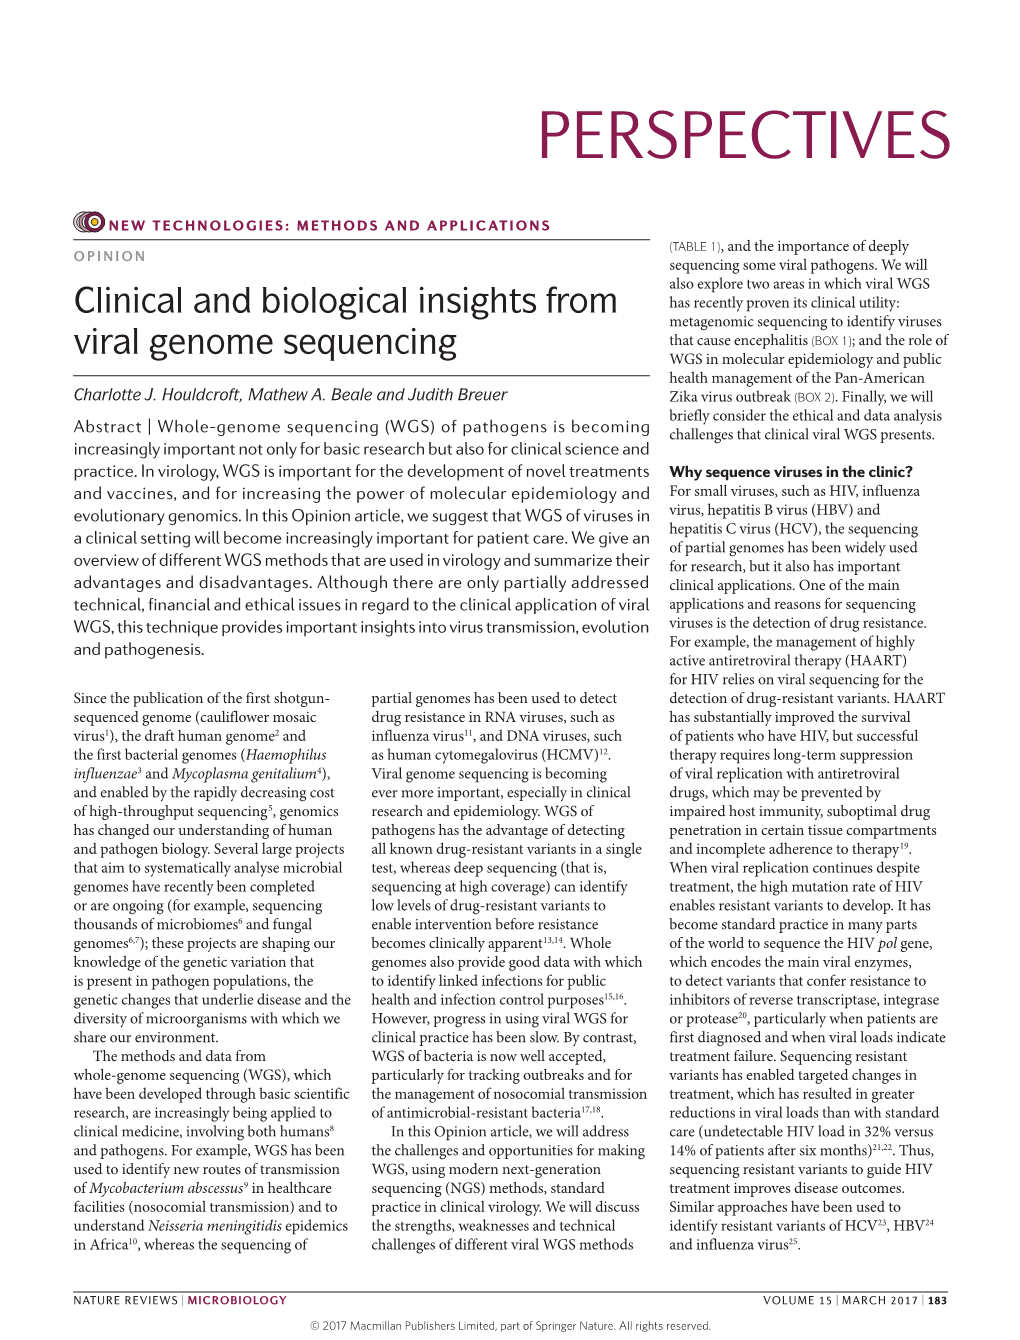 Clinical and Biological Insights from Viral Genome Sequencing